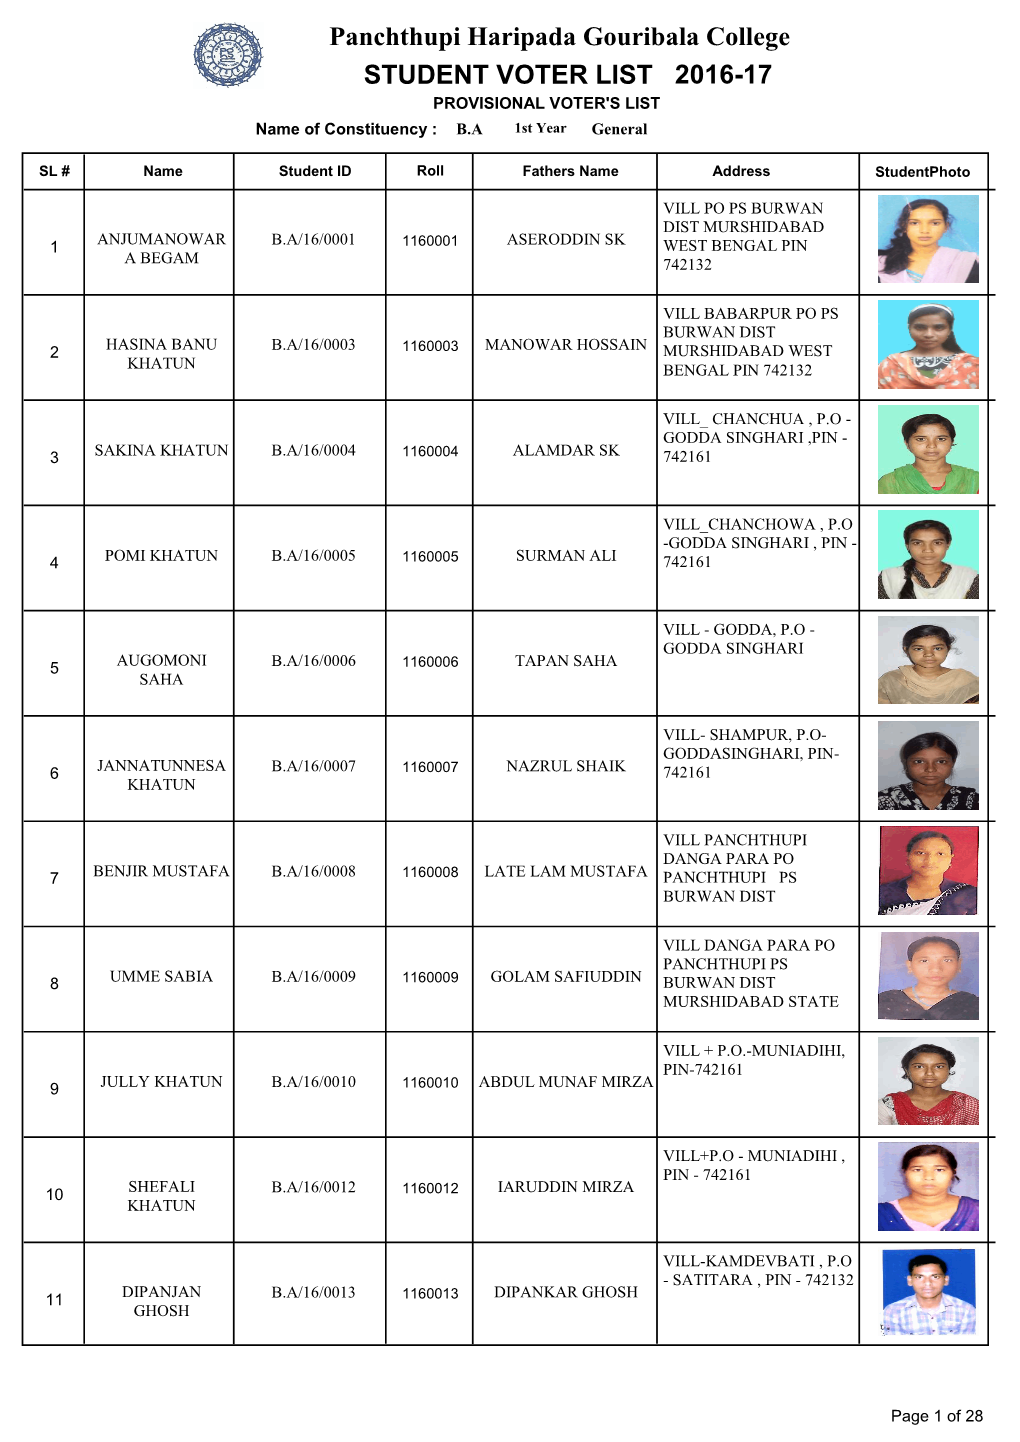 Provisional Voter List 1St Year(General)